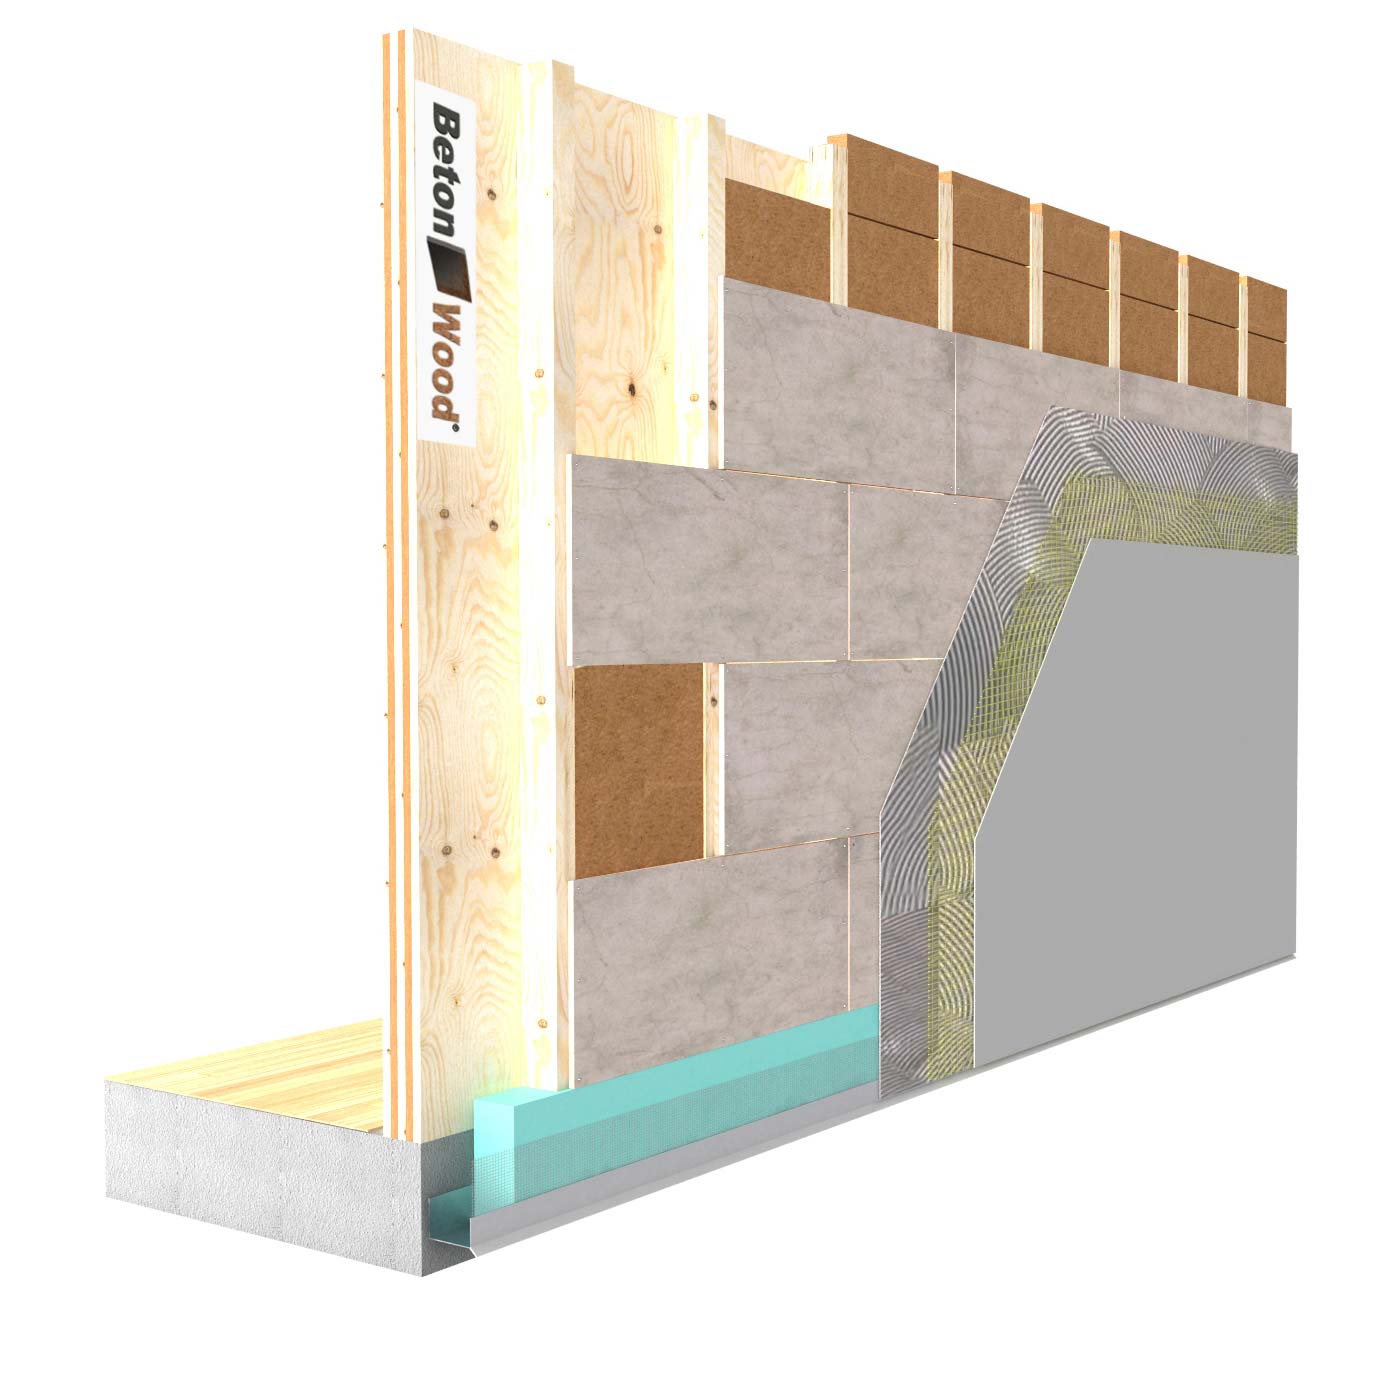 External insulation system with Therm fiber wood on wooden walls